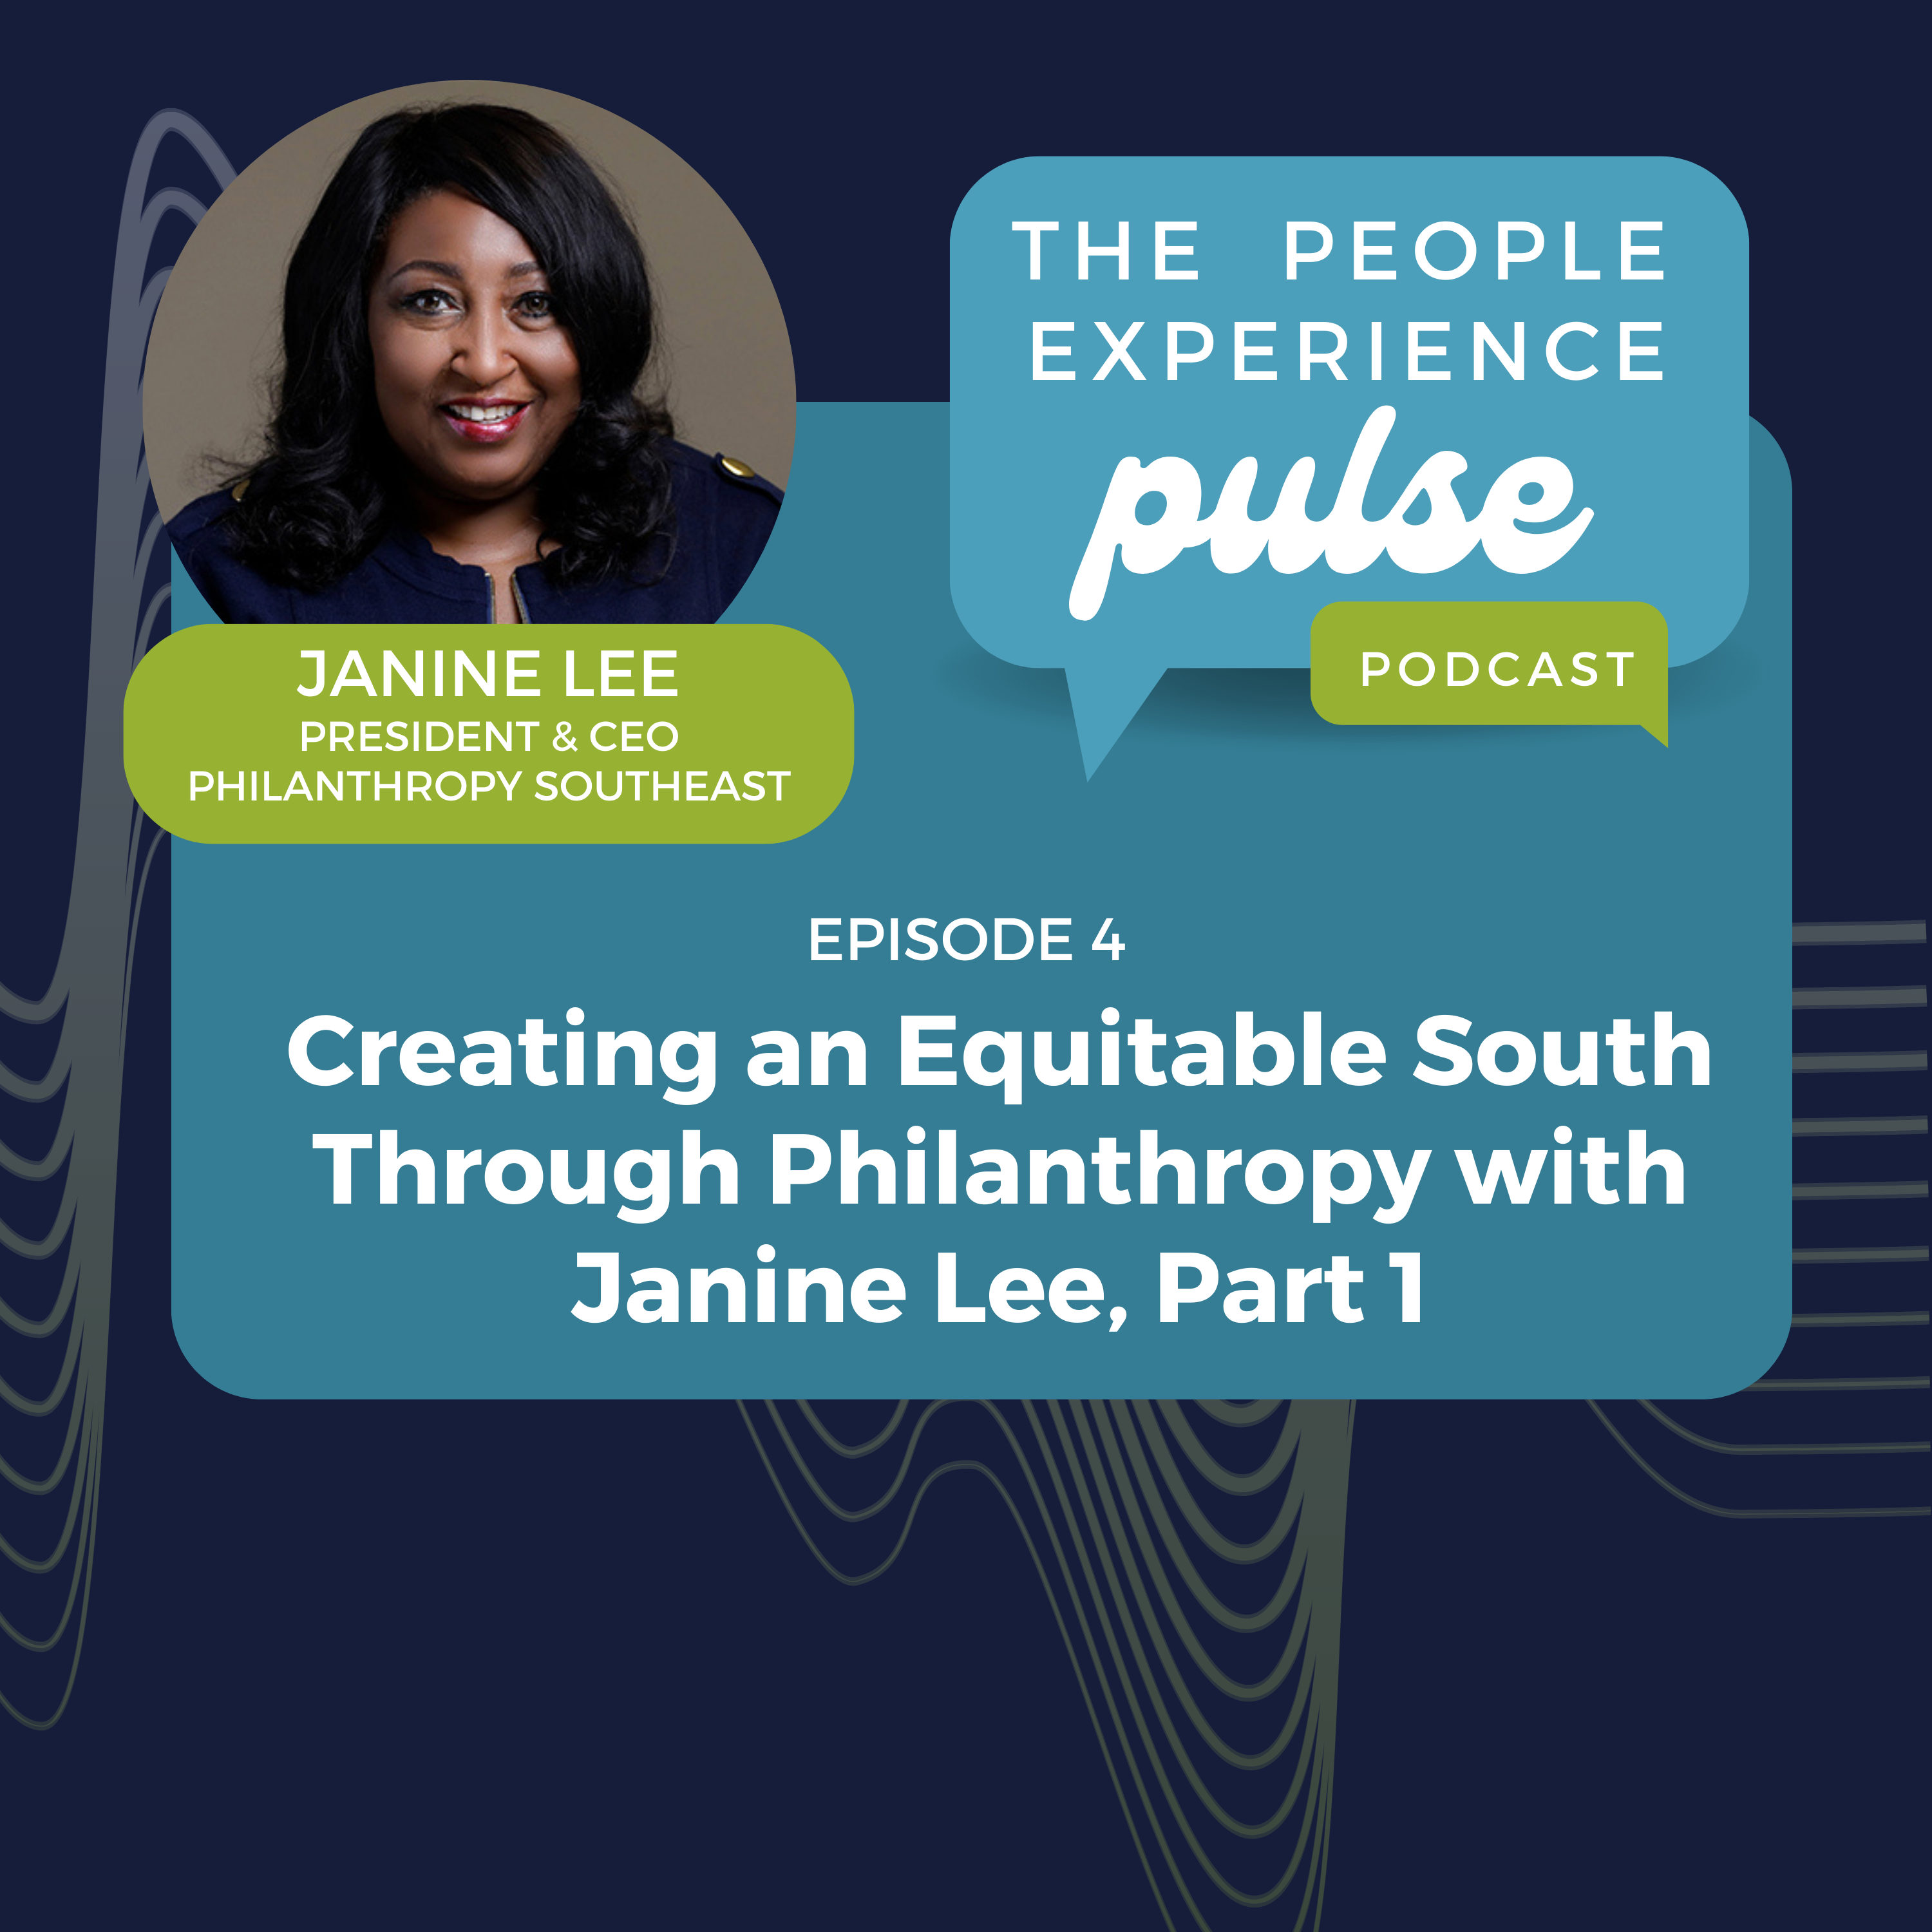 Creating an Equitable South Through Philanthropy with Janine Lee, Part 1